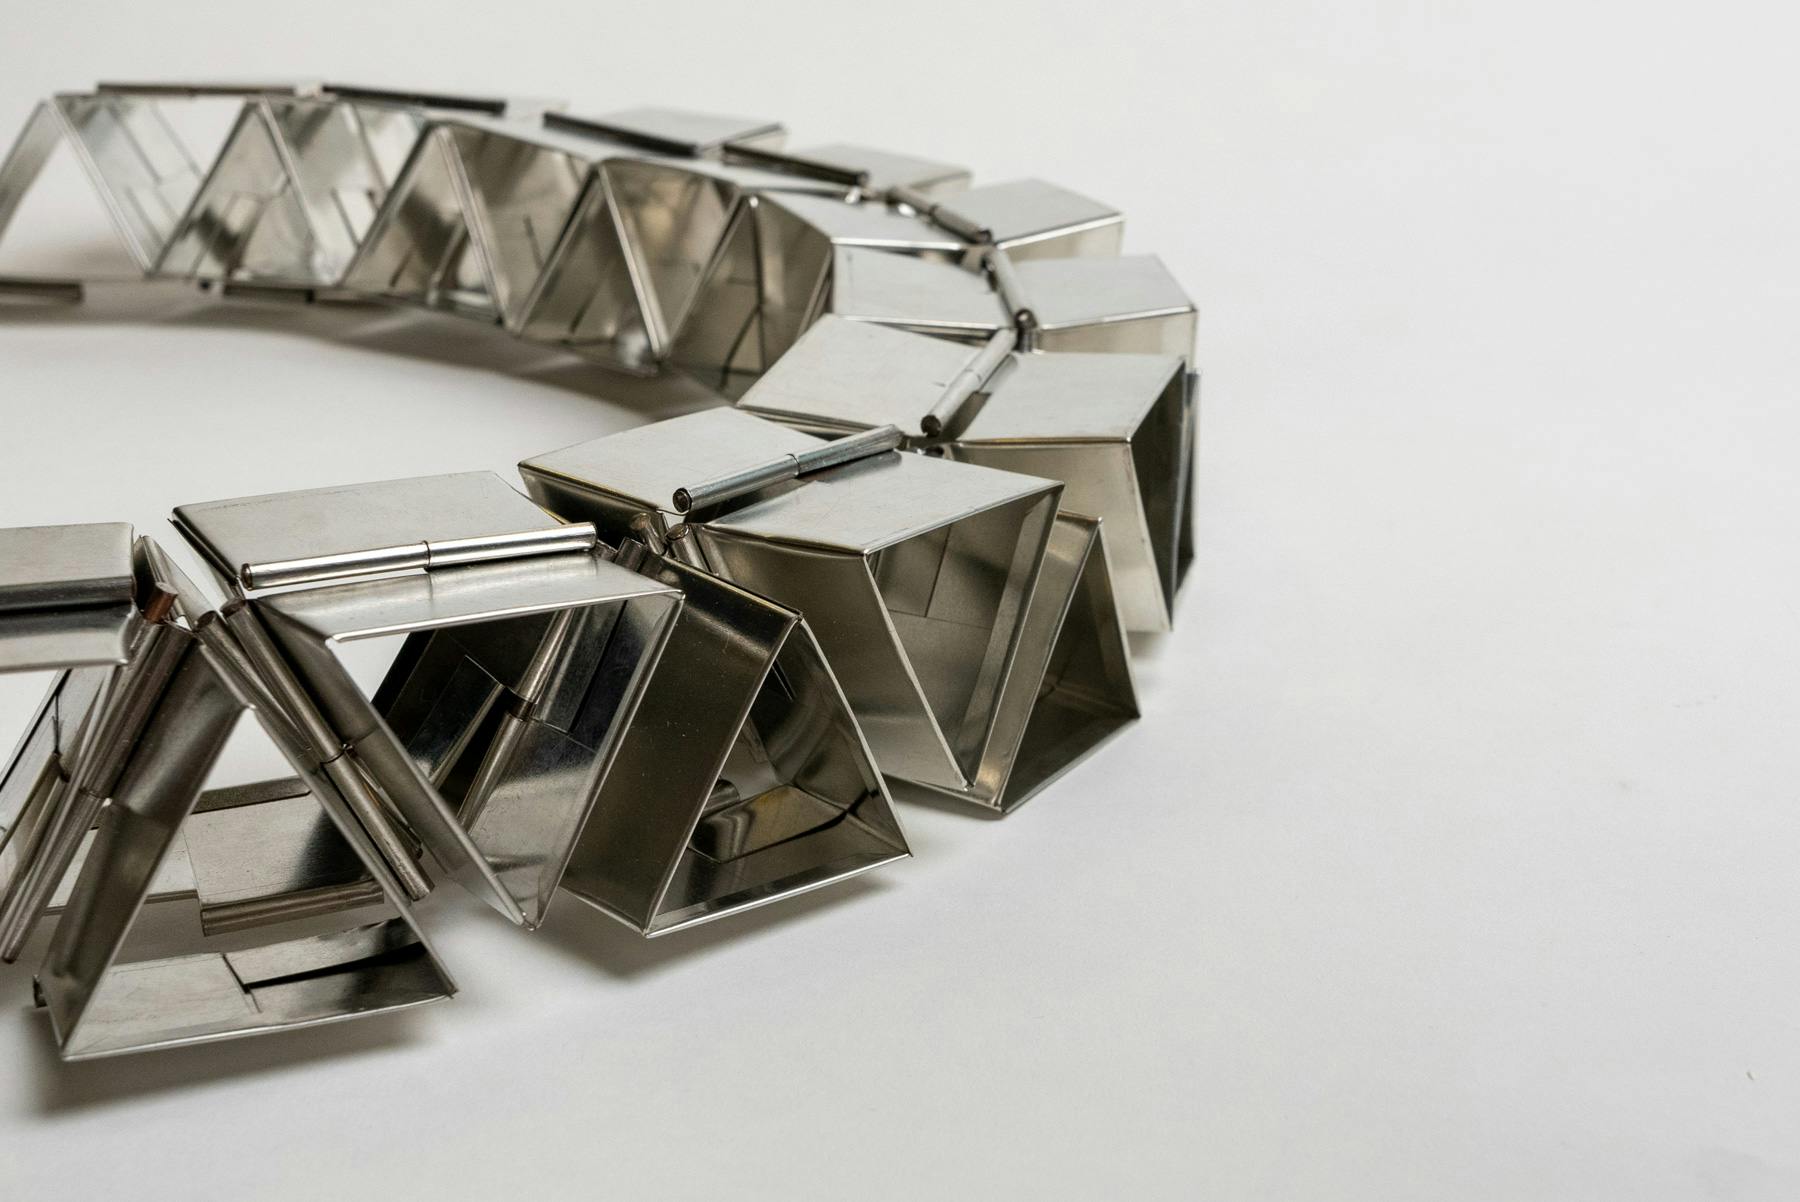 A long sequence of modular triangular prisms made from tin sheets attached using hinges. These hinges allow for fluid movement in an otherwise solid object.